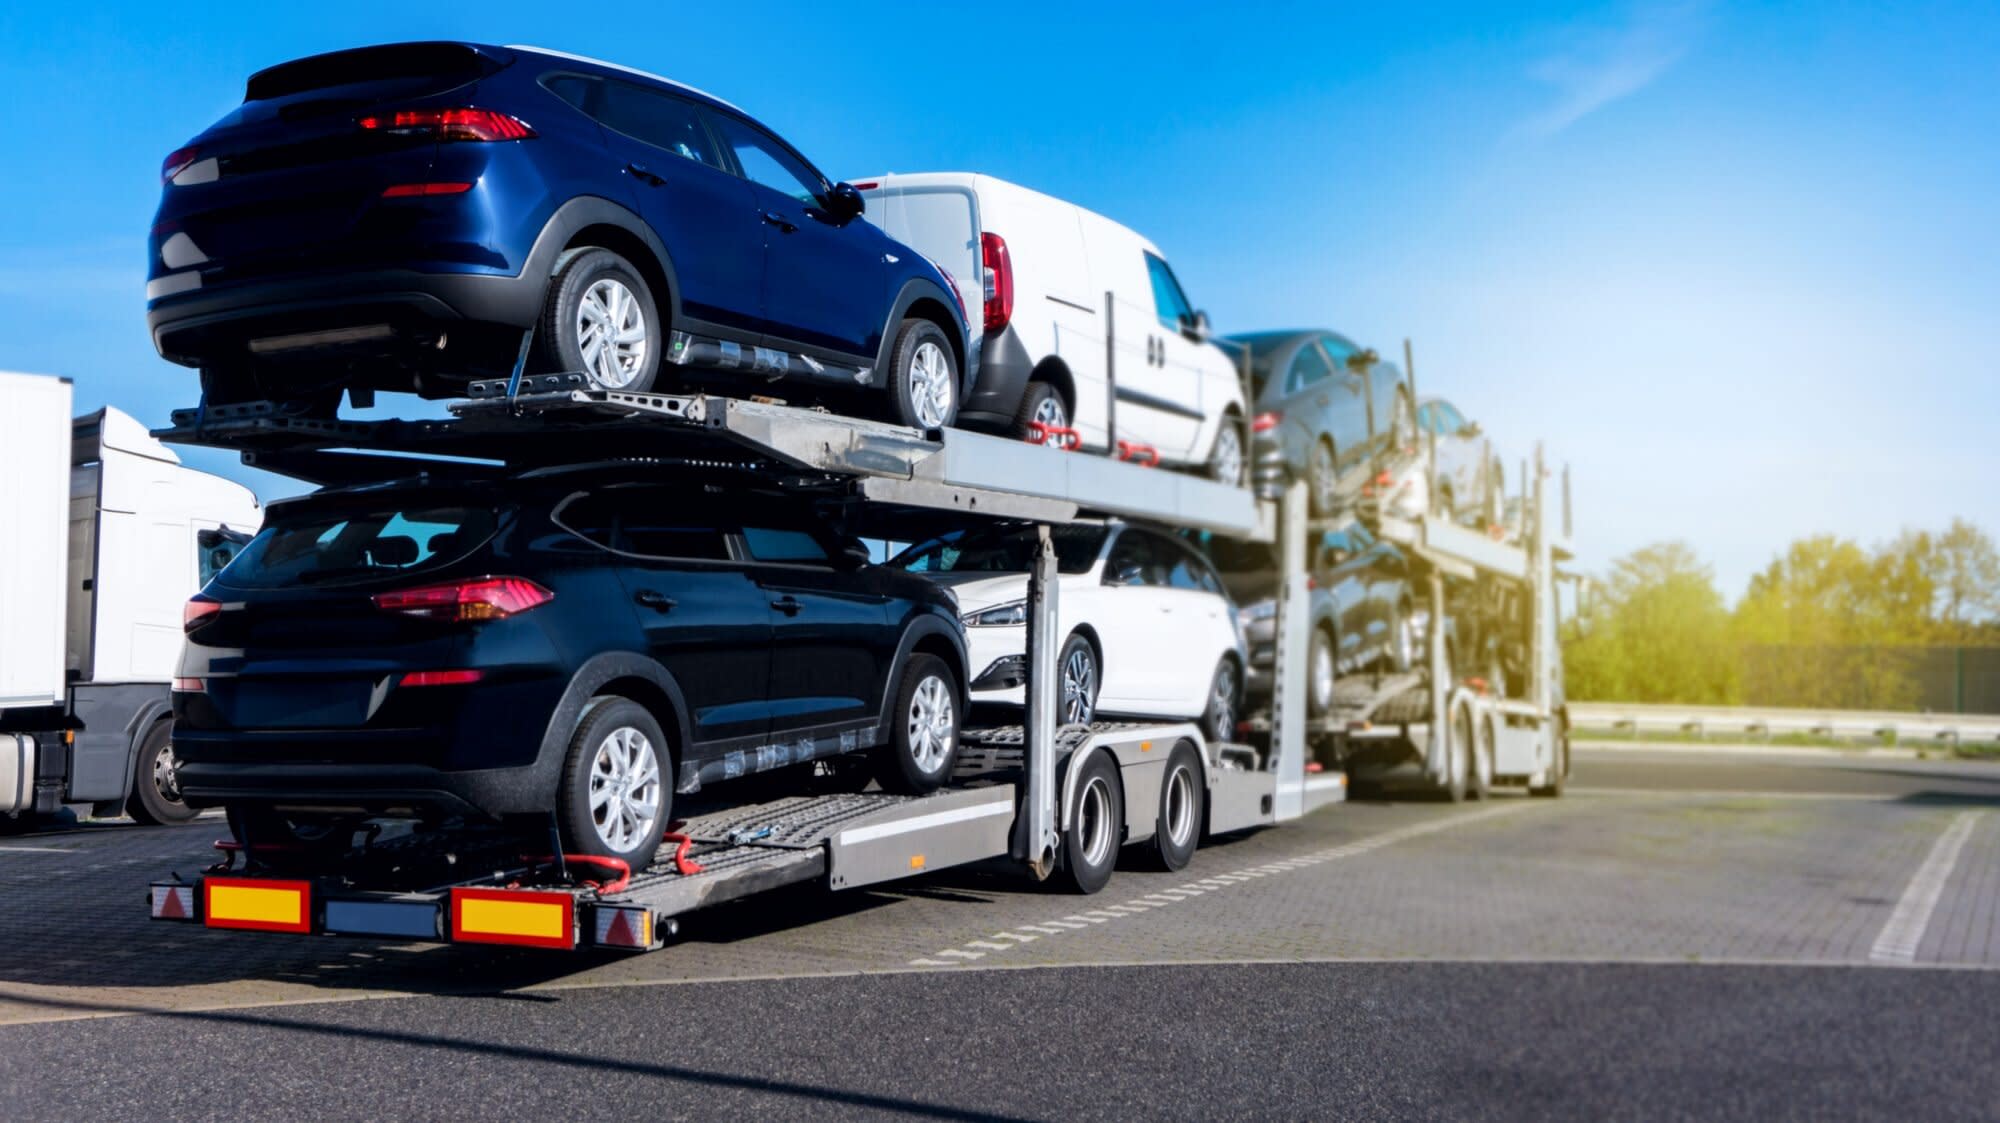 How Much Does Car Shipping Cost in 2021?